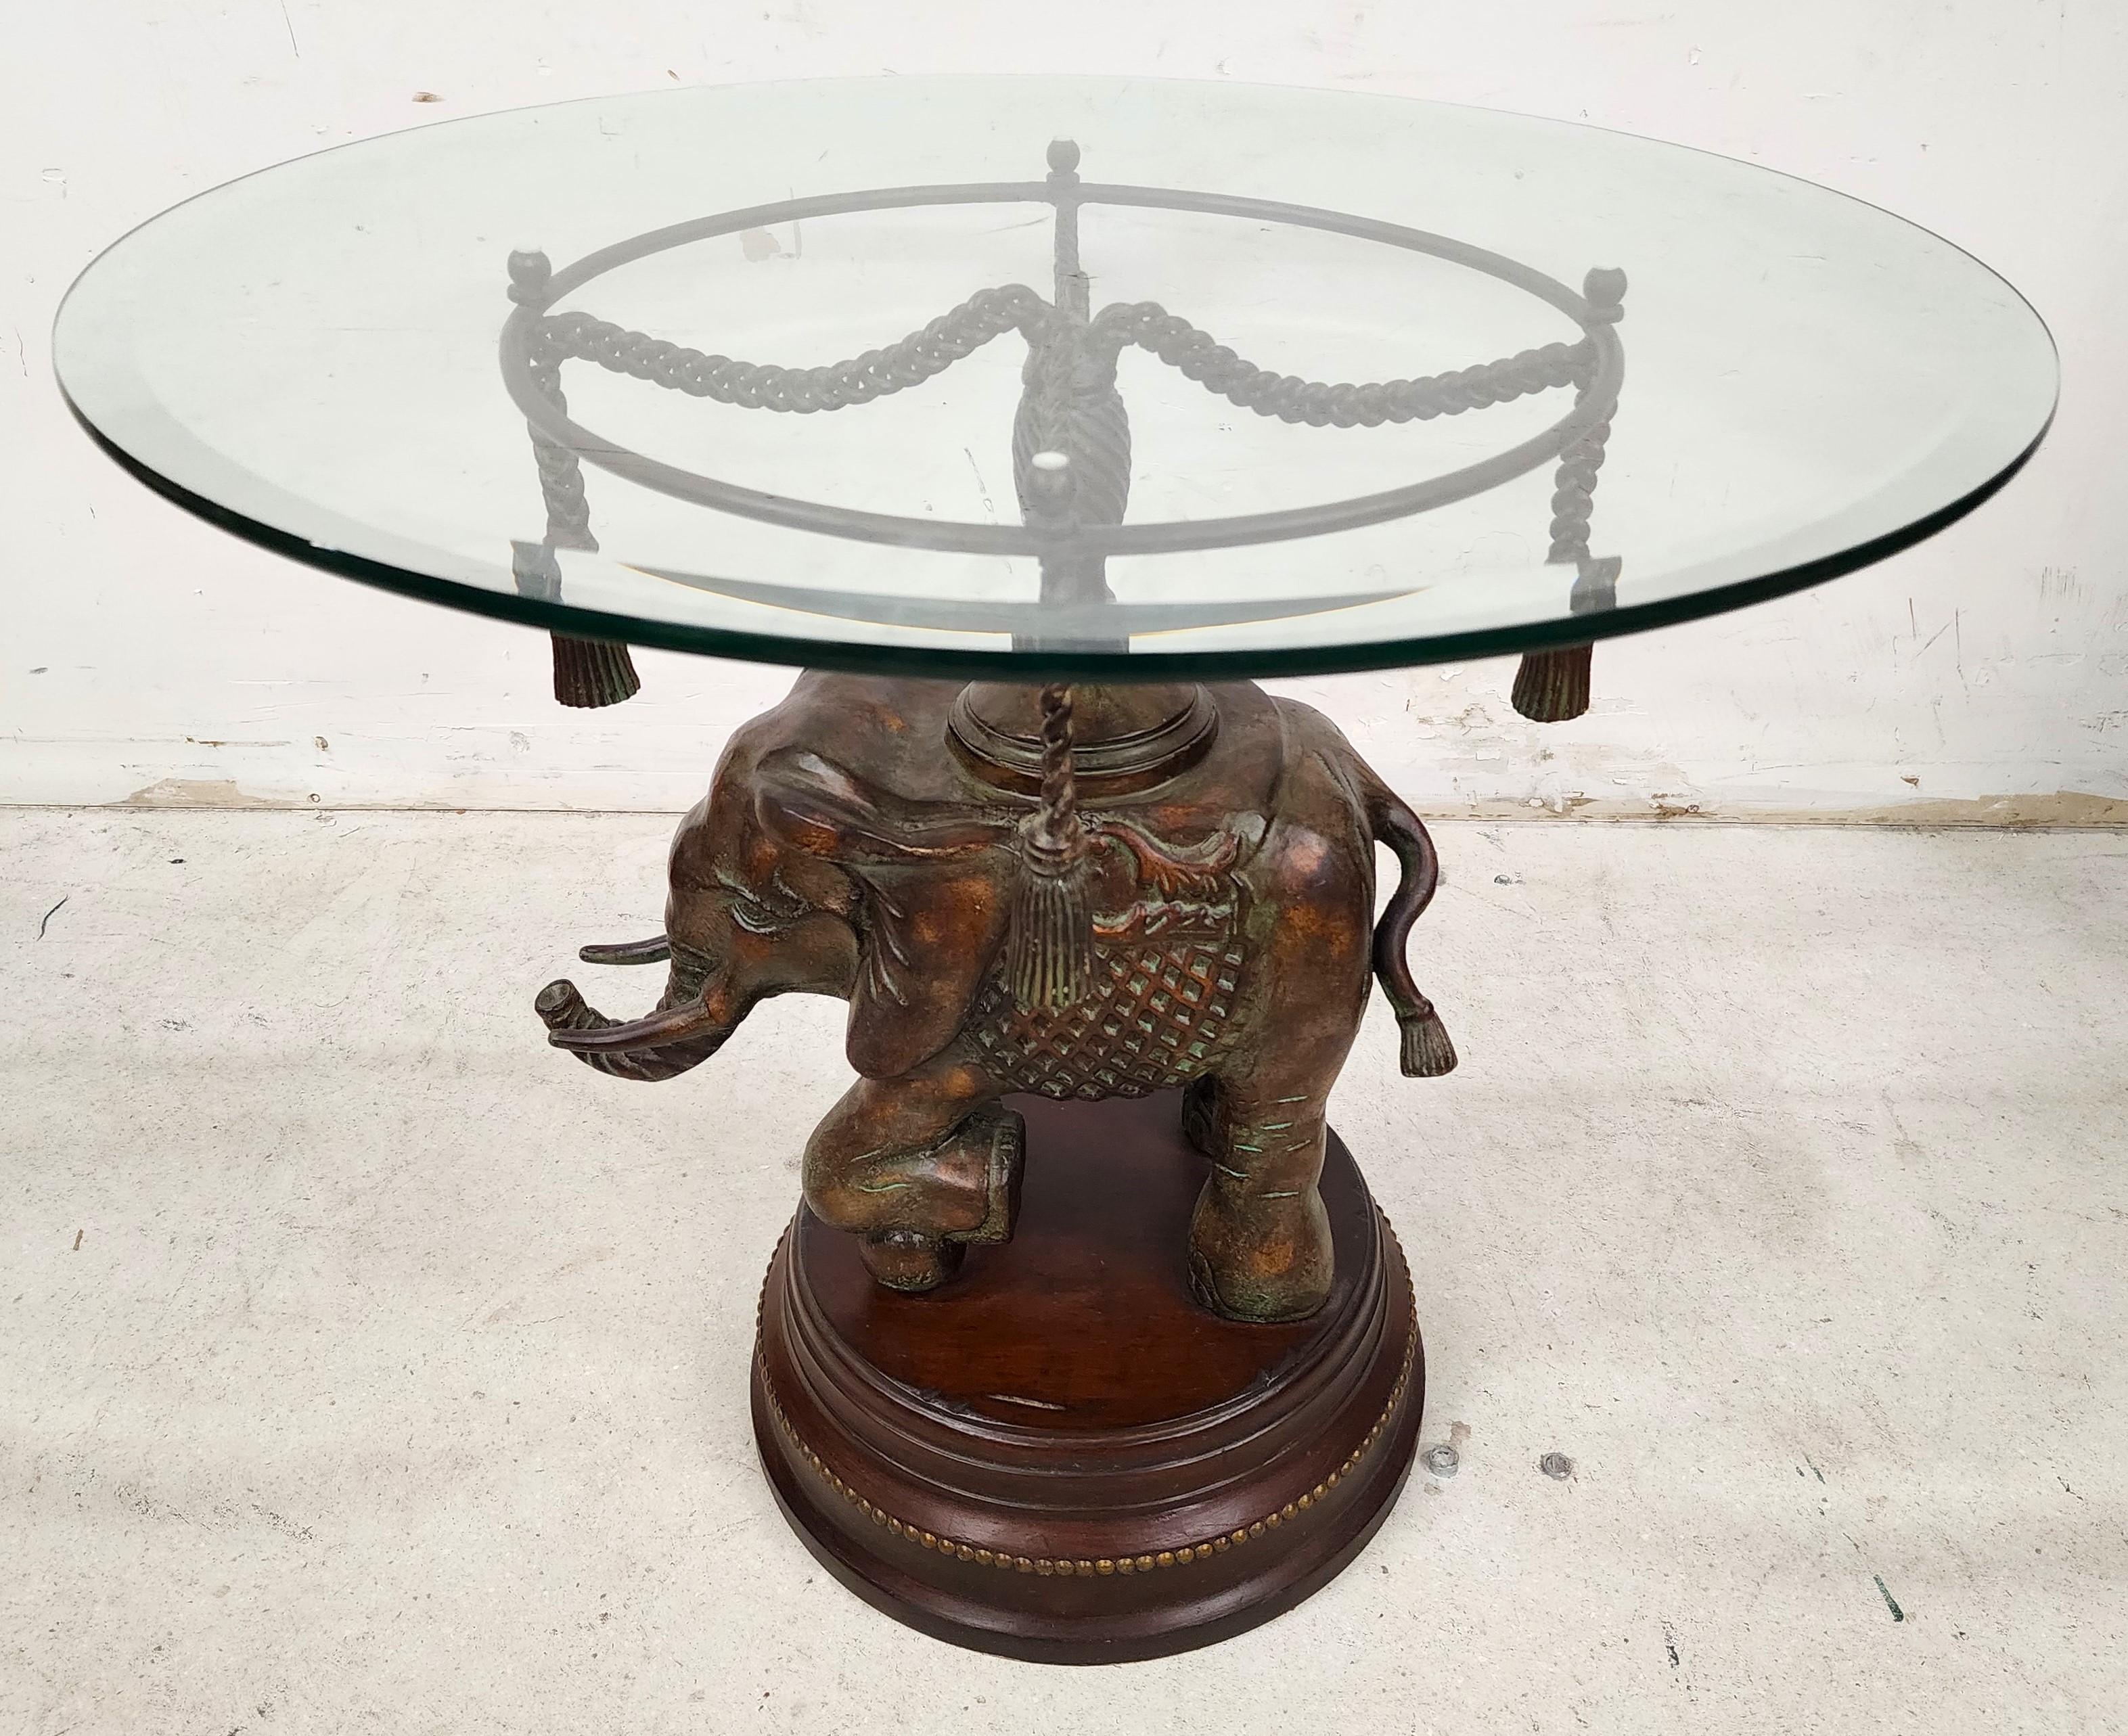 elephant on top of the table